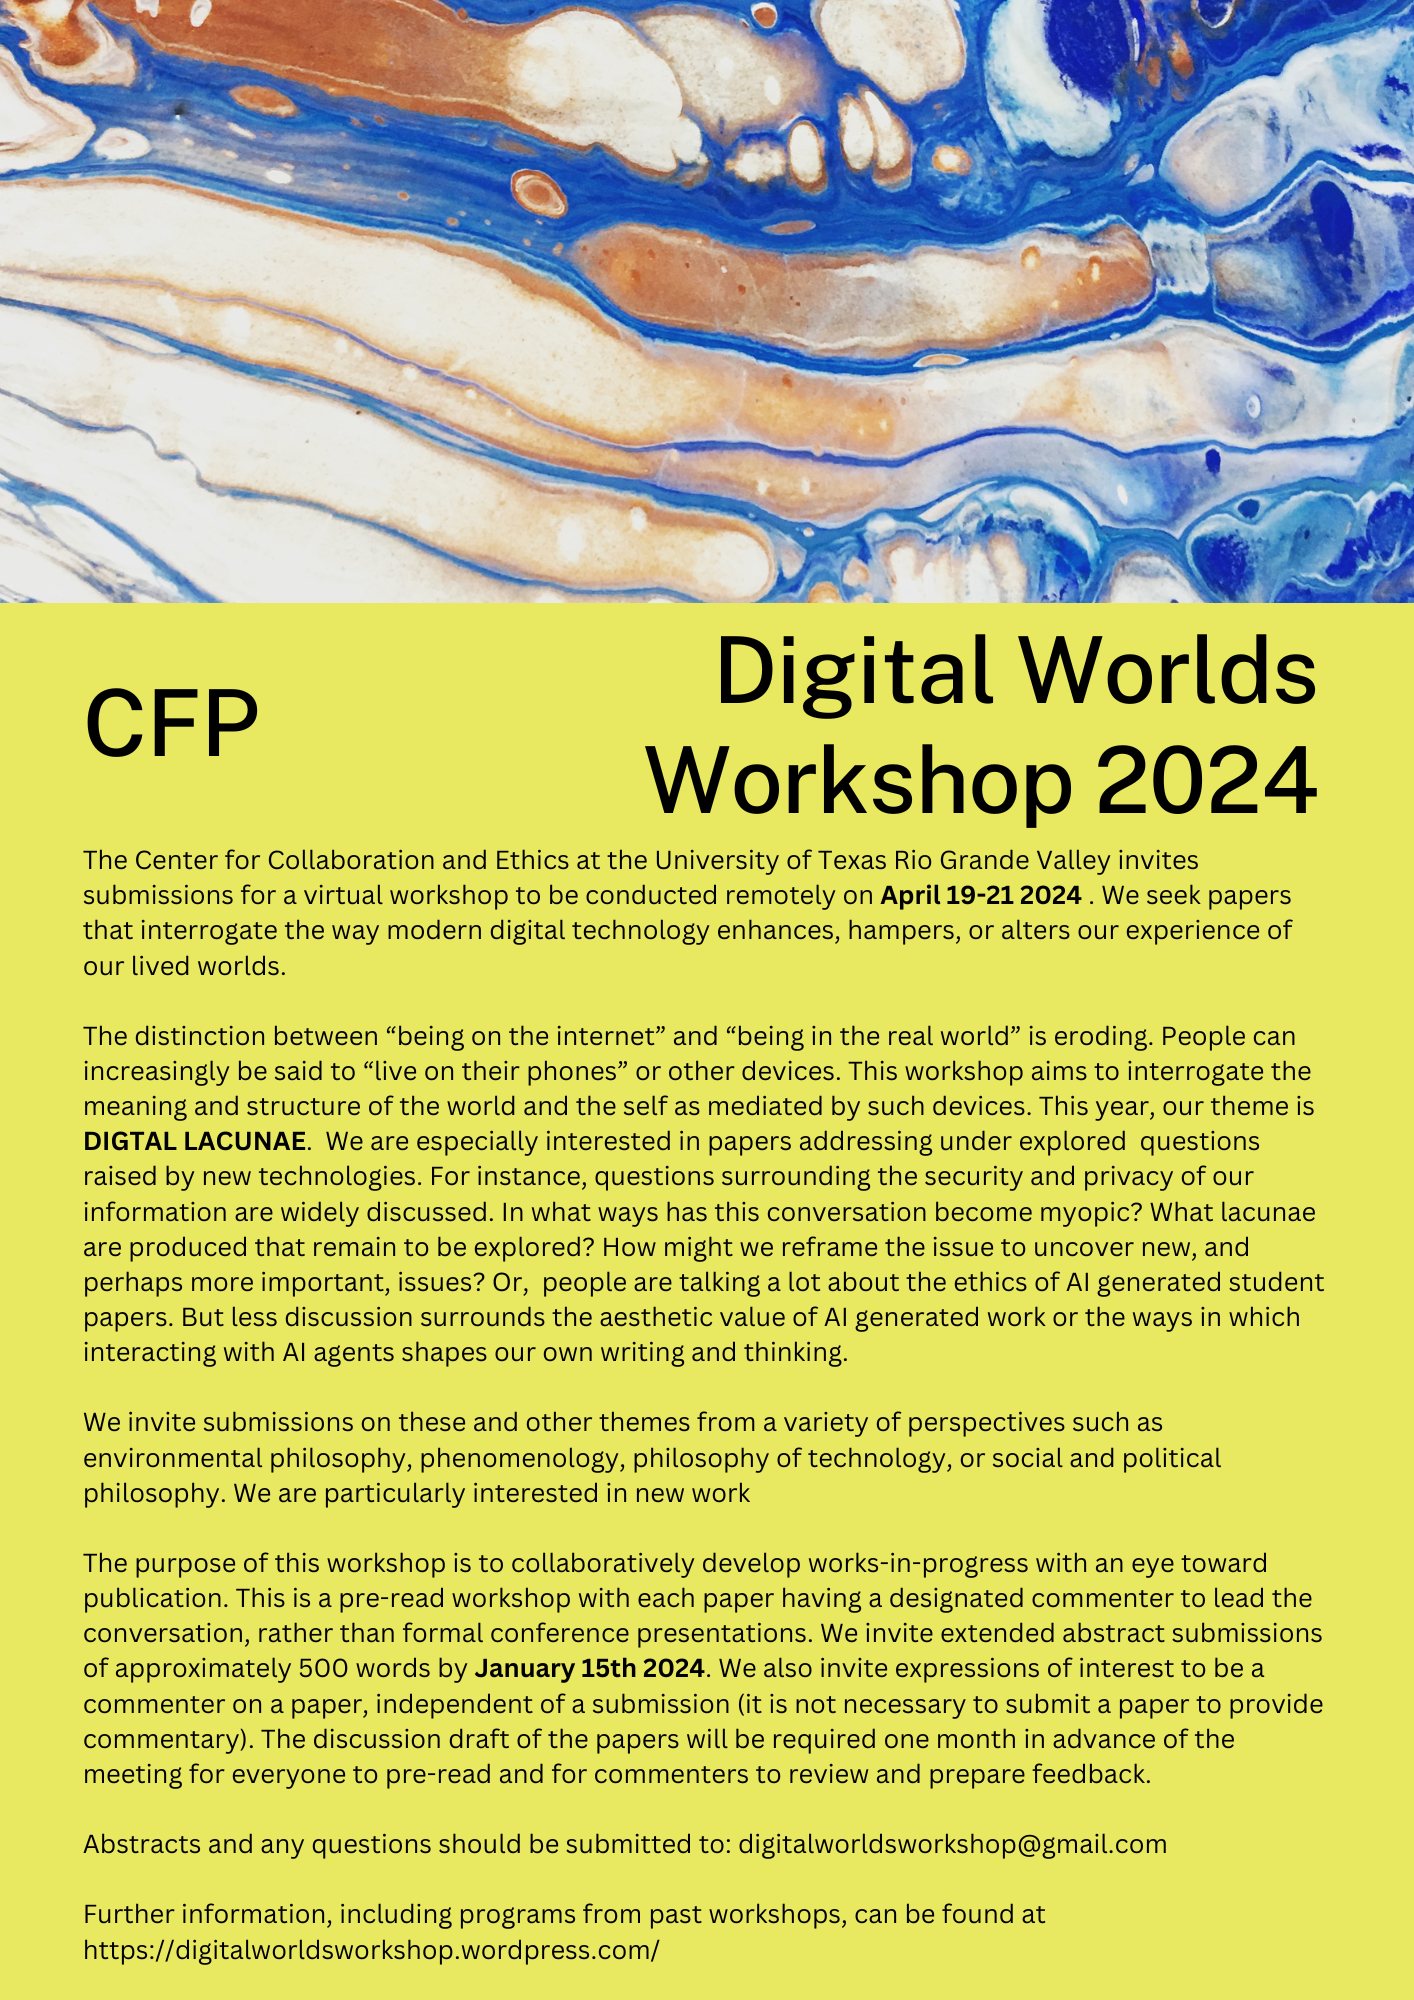 Dr. Ian Werkheiser and Dr. Mike Butler are pleased to announce the 4th annual Digital Worlds Workshop!